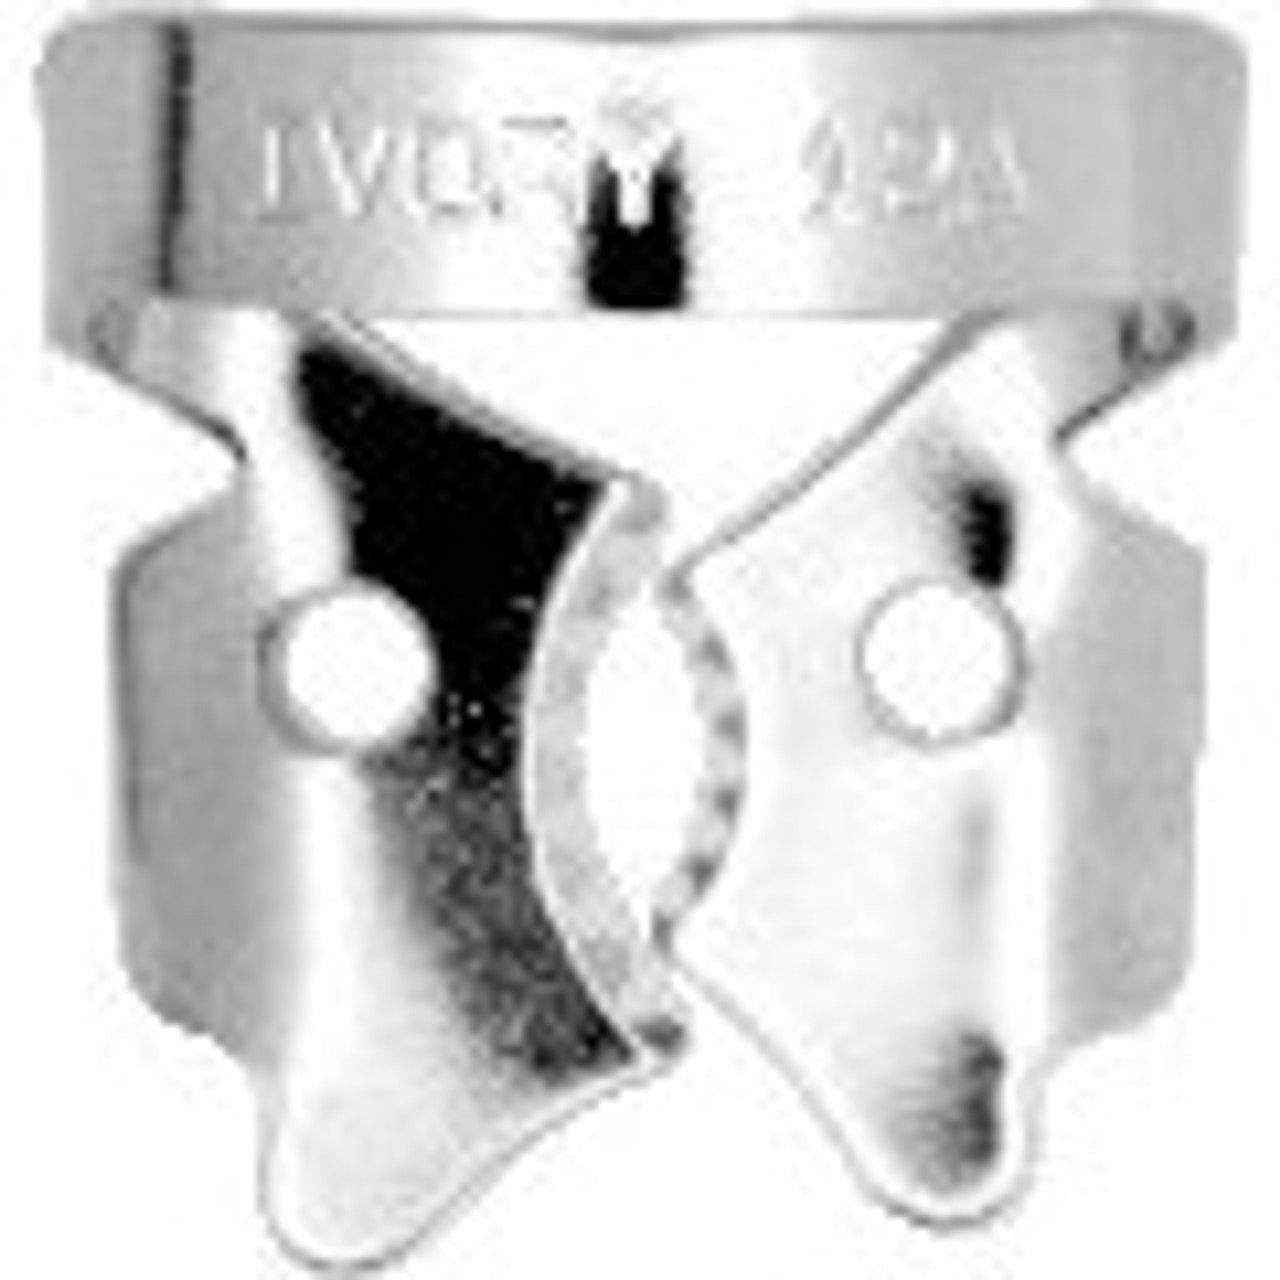 Ivory Rubber Dam Clamps, Winged 12A, Right Partially Erupted, 3rd Molar, Kulzer, 50057348